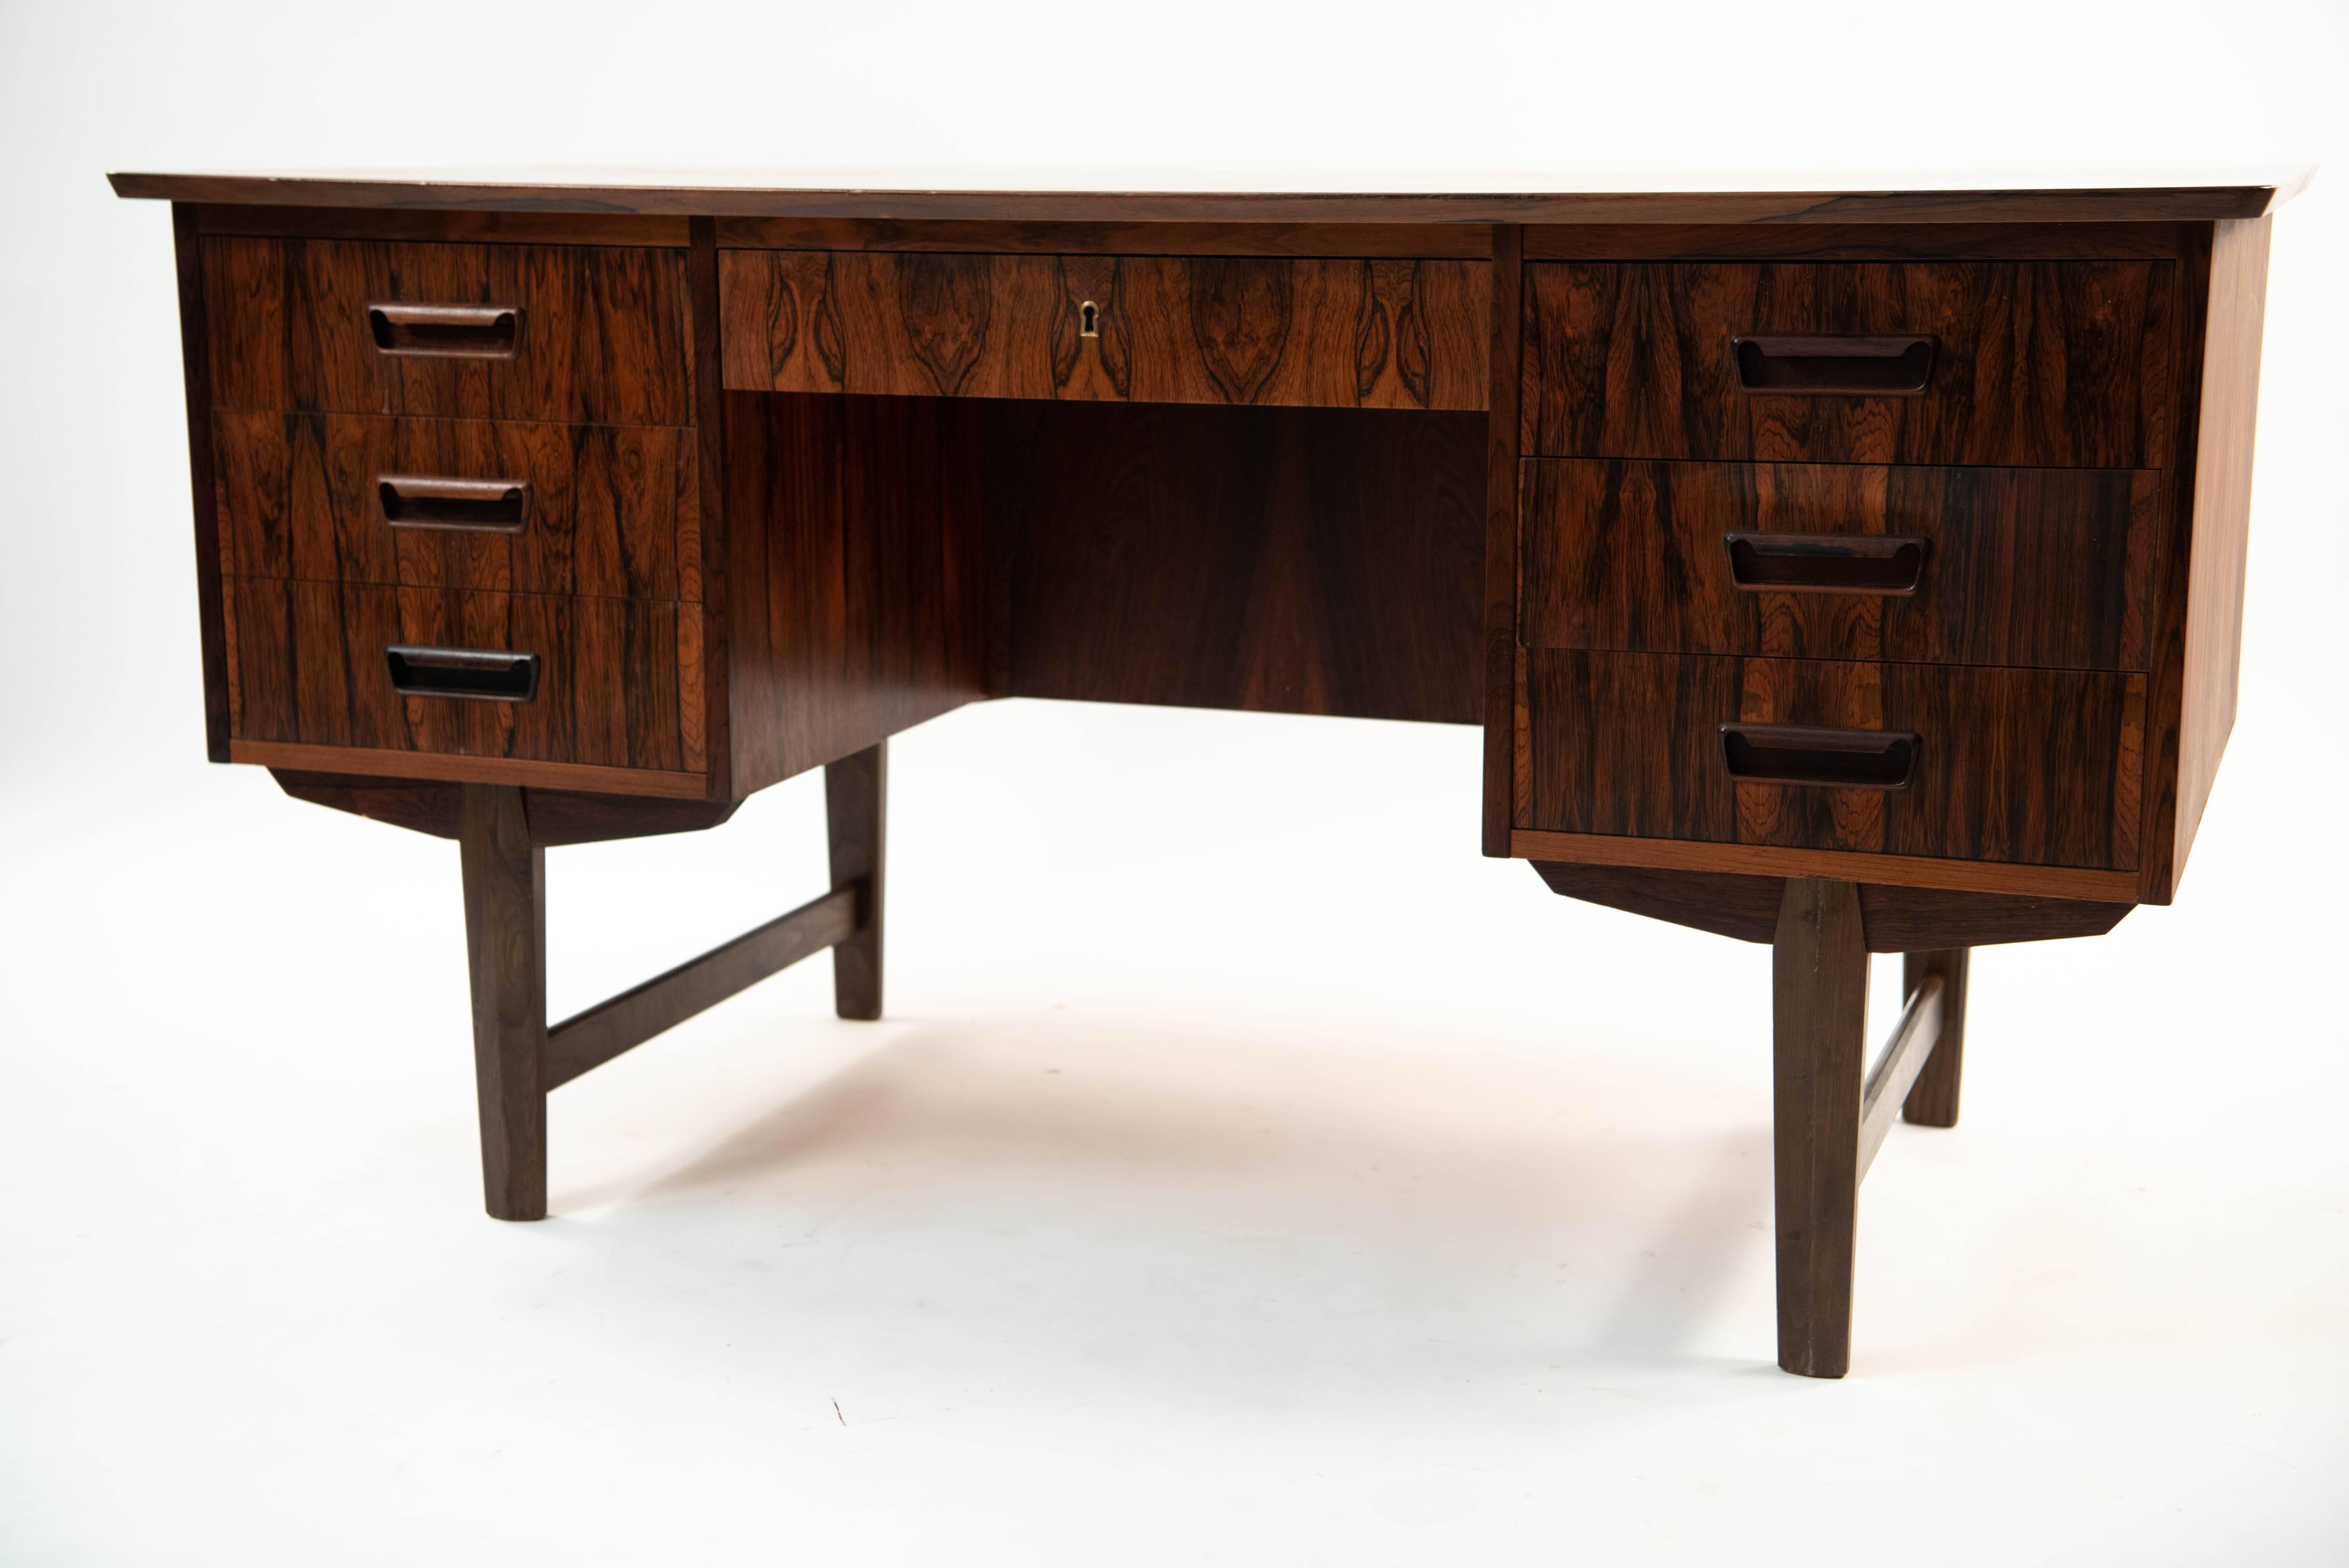 This Danish midcentury desk is made of rosewood with a stunning color and grain. It sits on sturdy legs and features drawers on either side to maximize available storage.